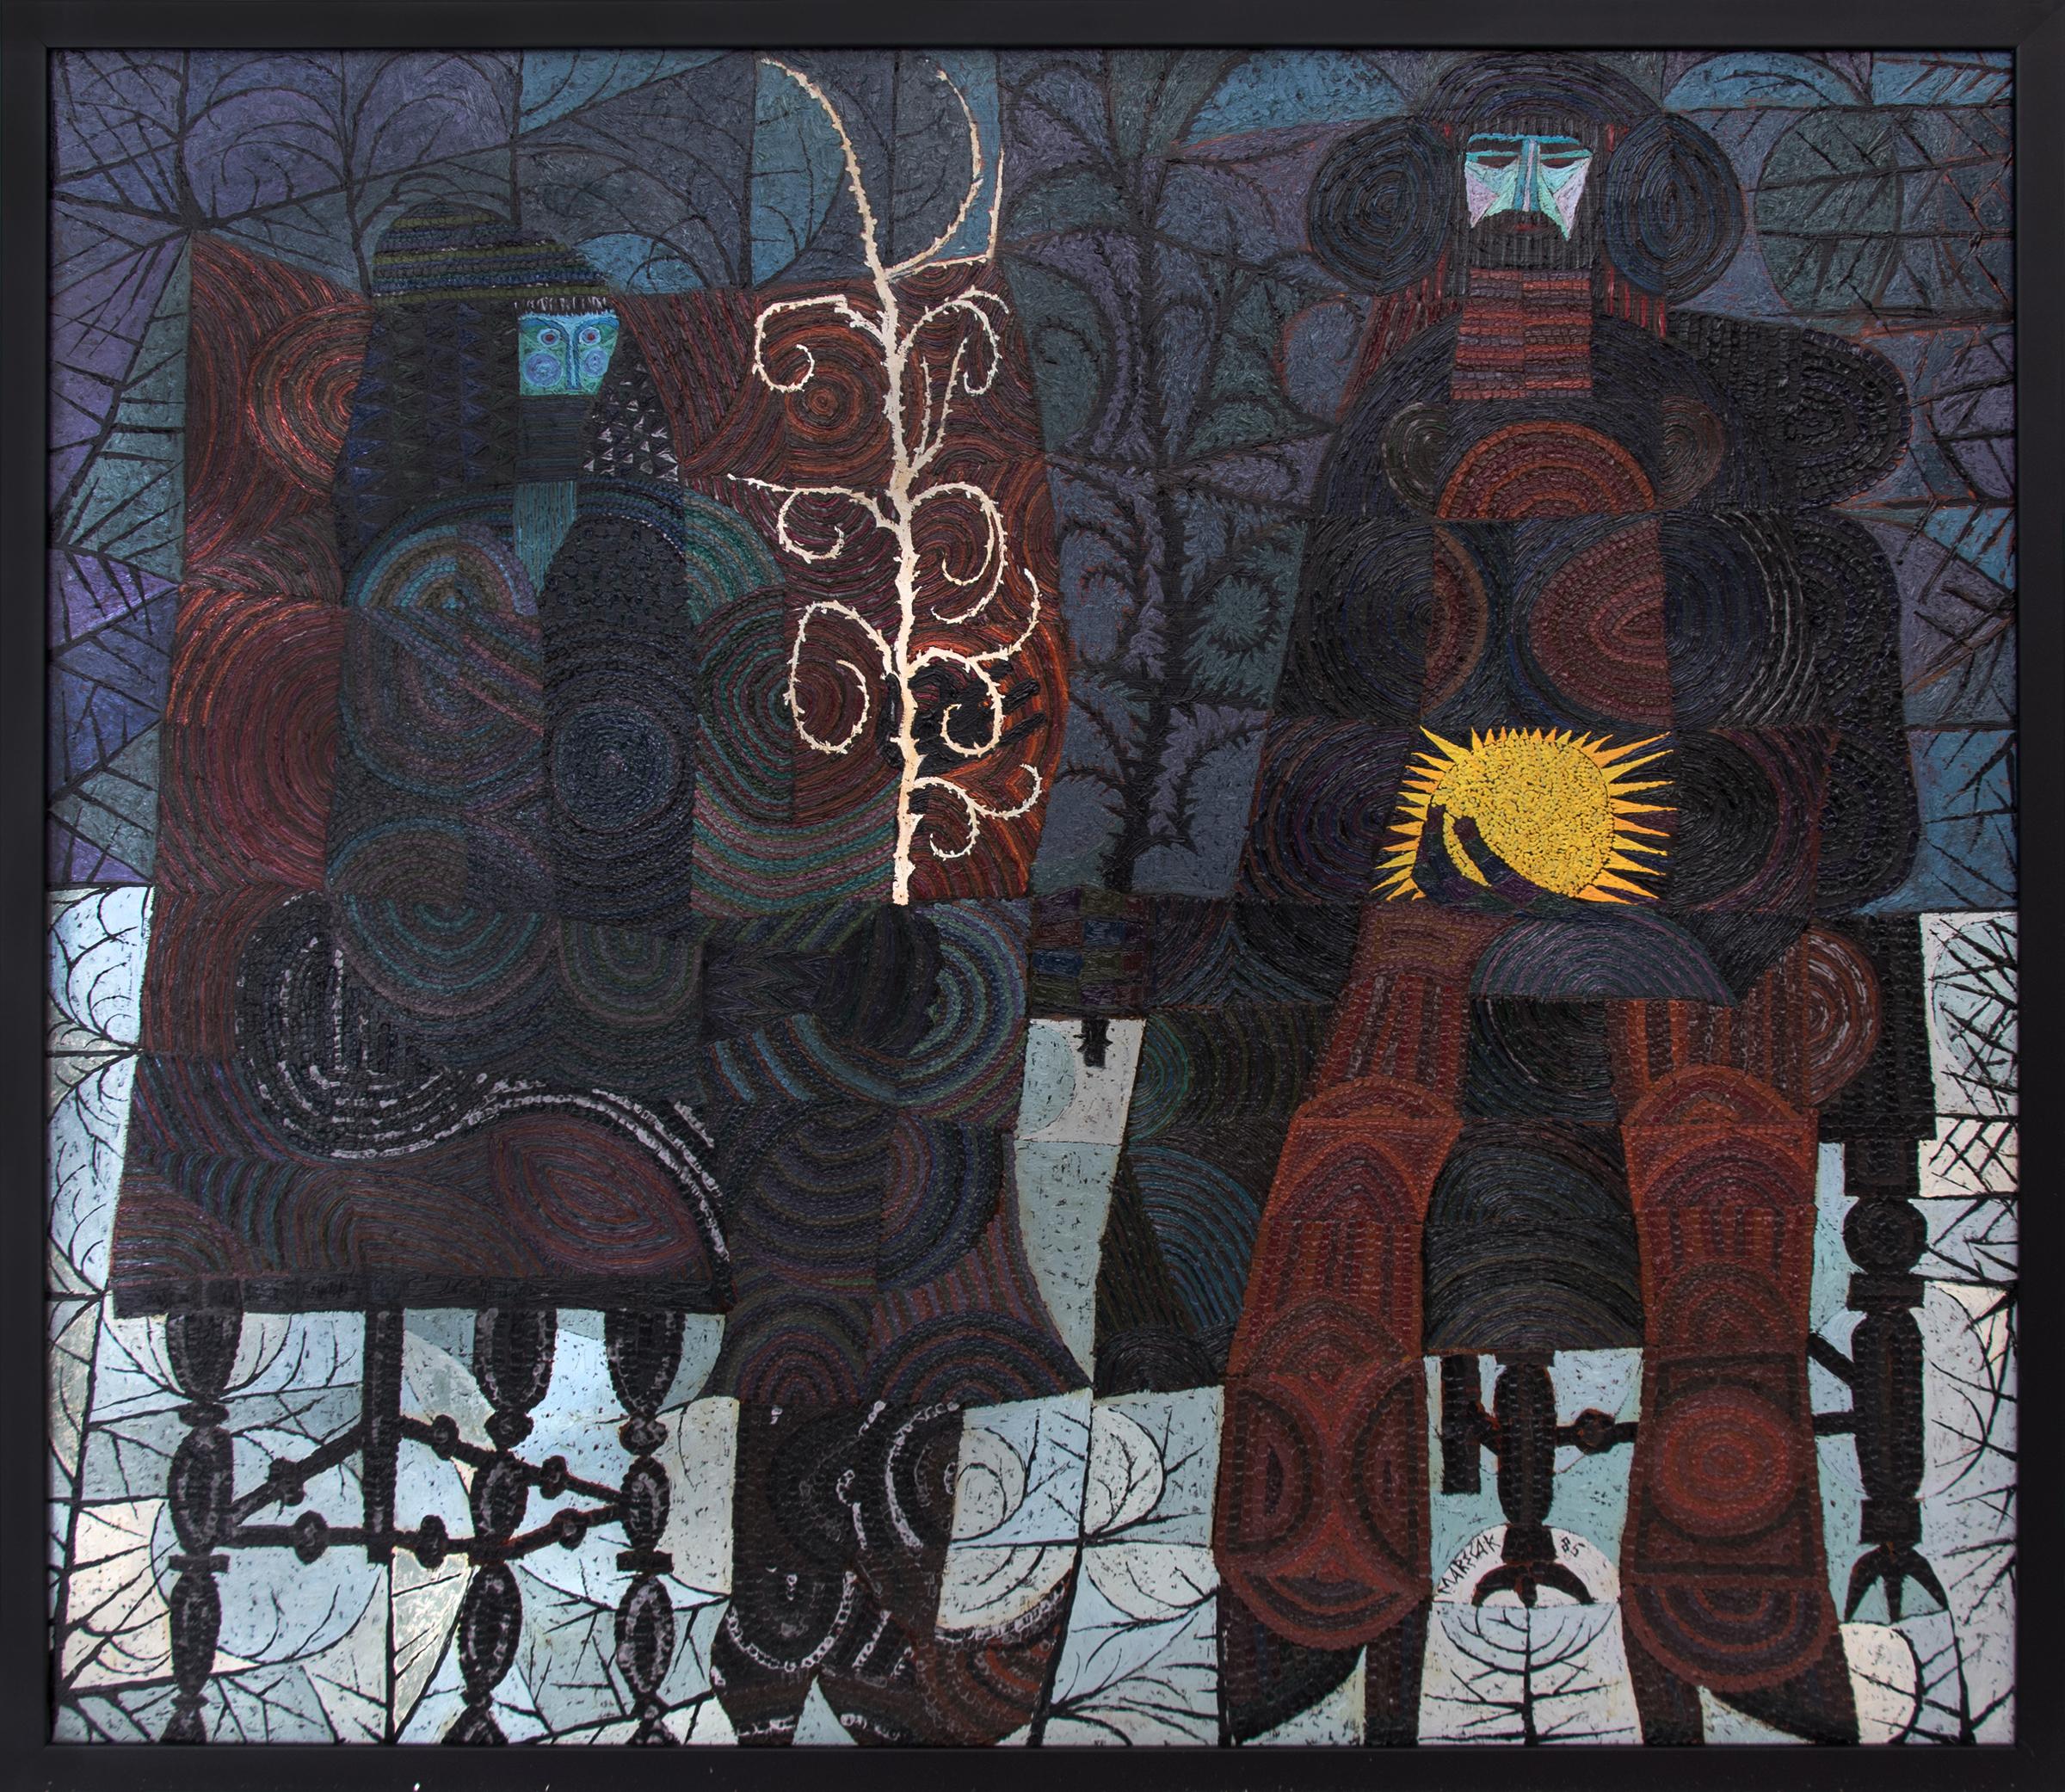 Edward Marecak Figurative Painting - Winter Witches Contemplating the Return of Spring